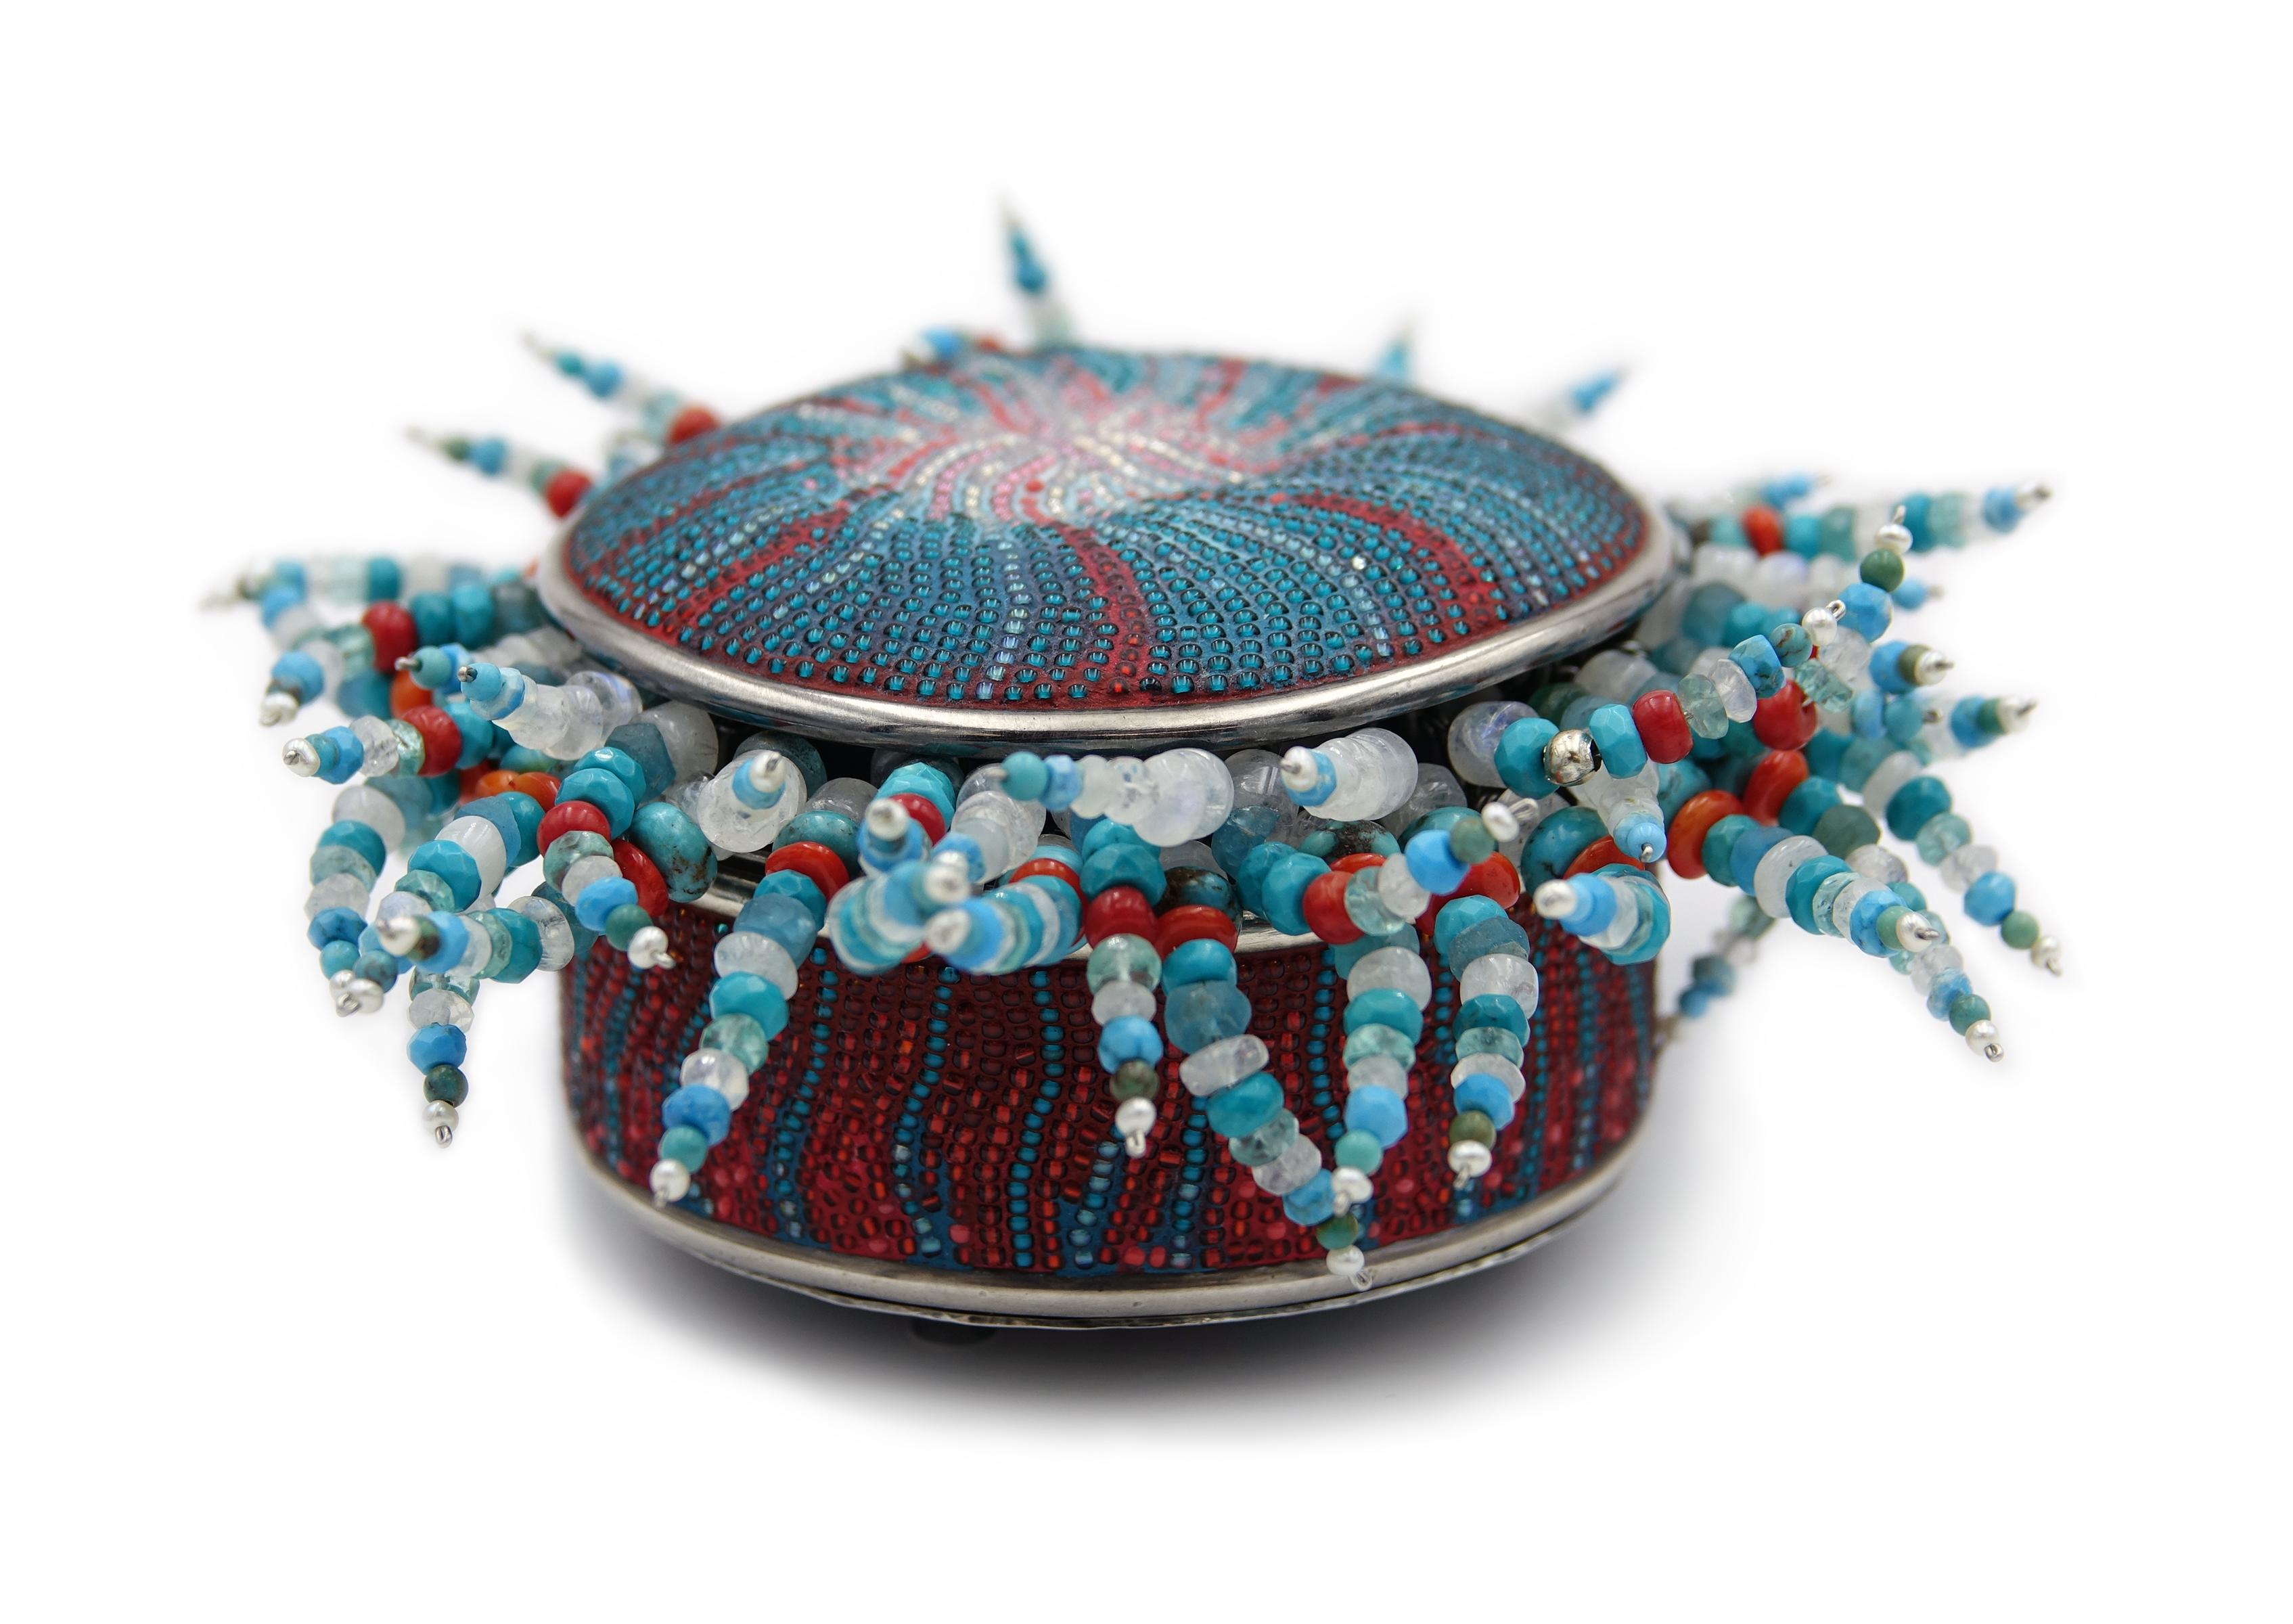 Anemone Jewelry Suite is a micro-mosaic jewelry box made of 85 sterling silver parts, including handmade screws and bolts, glass seed bead micro-mosaics, moonstones, coral, turquoise, and pearls. Box transforms into a convertible pendant/brooch,